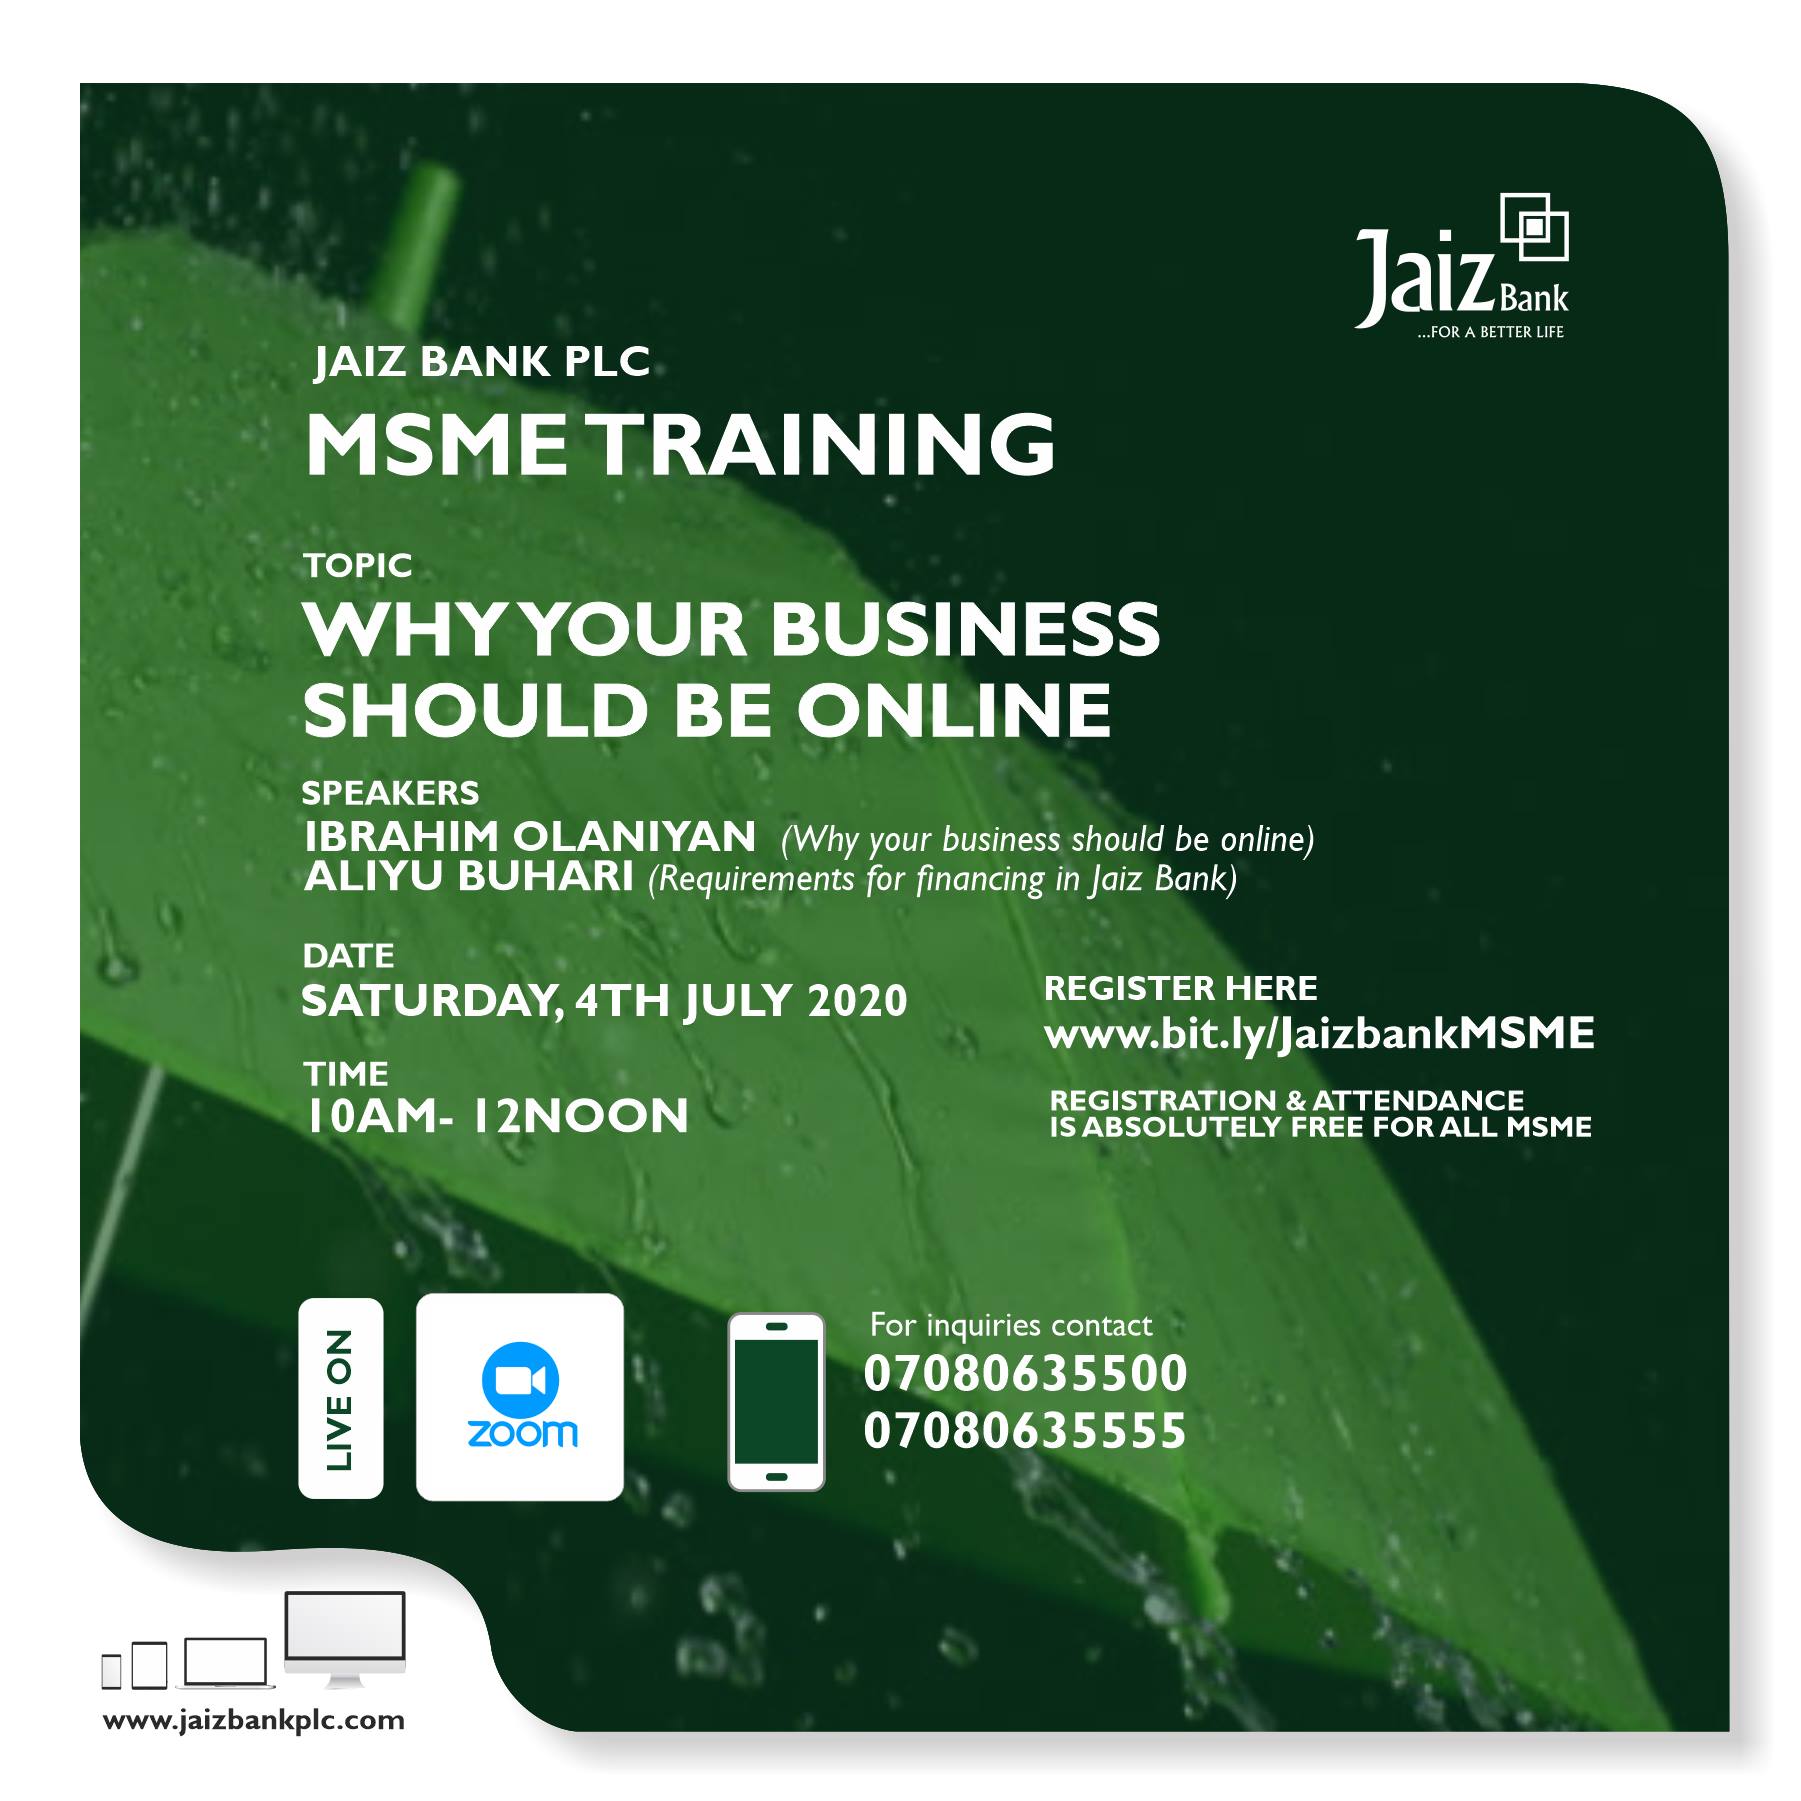 jaiz-bank-to-host-training-on-financing-requirements-and-online-business-for-msmes-msme-africa